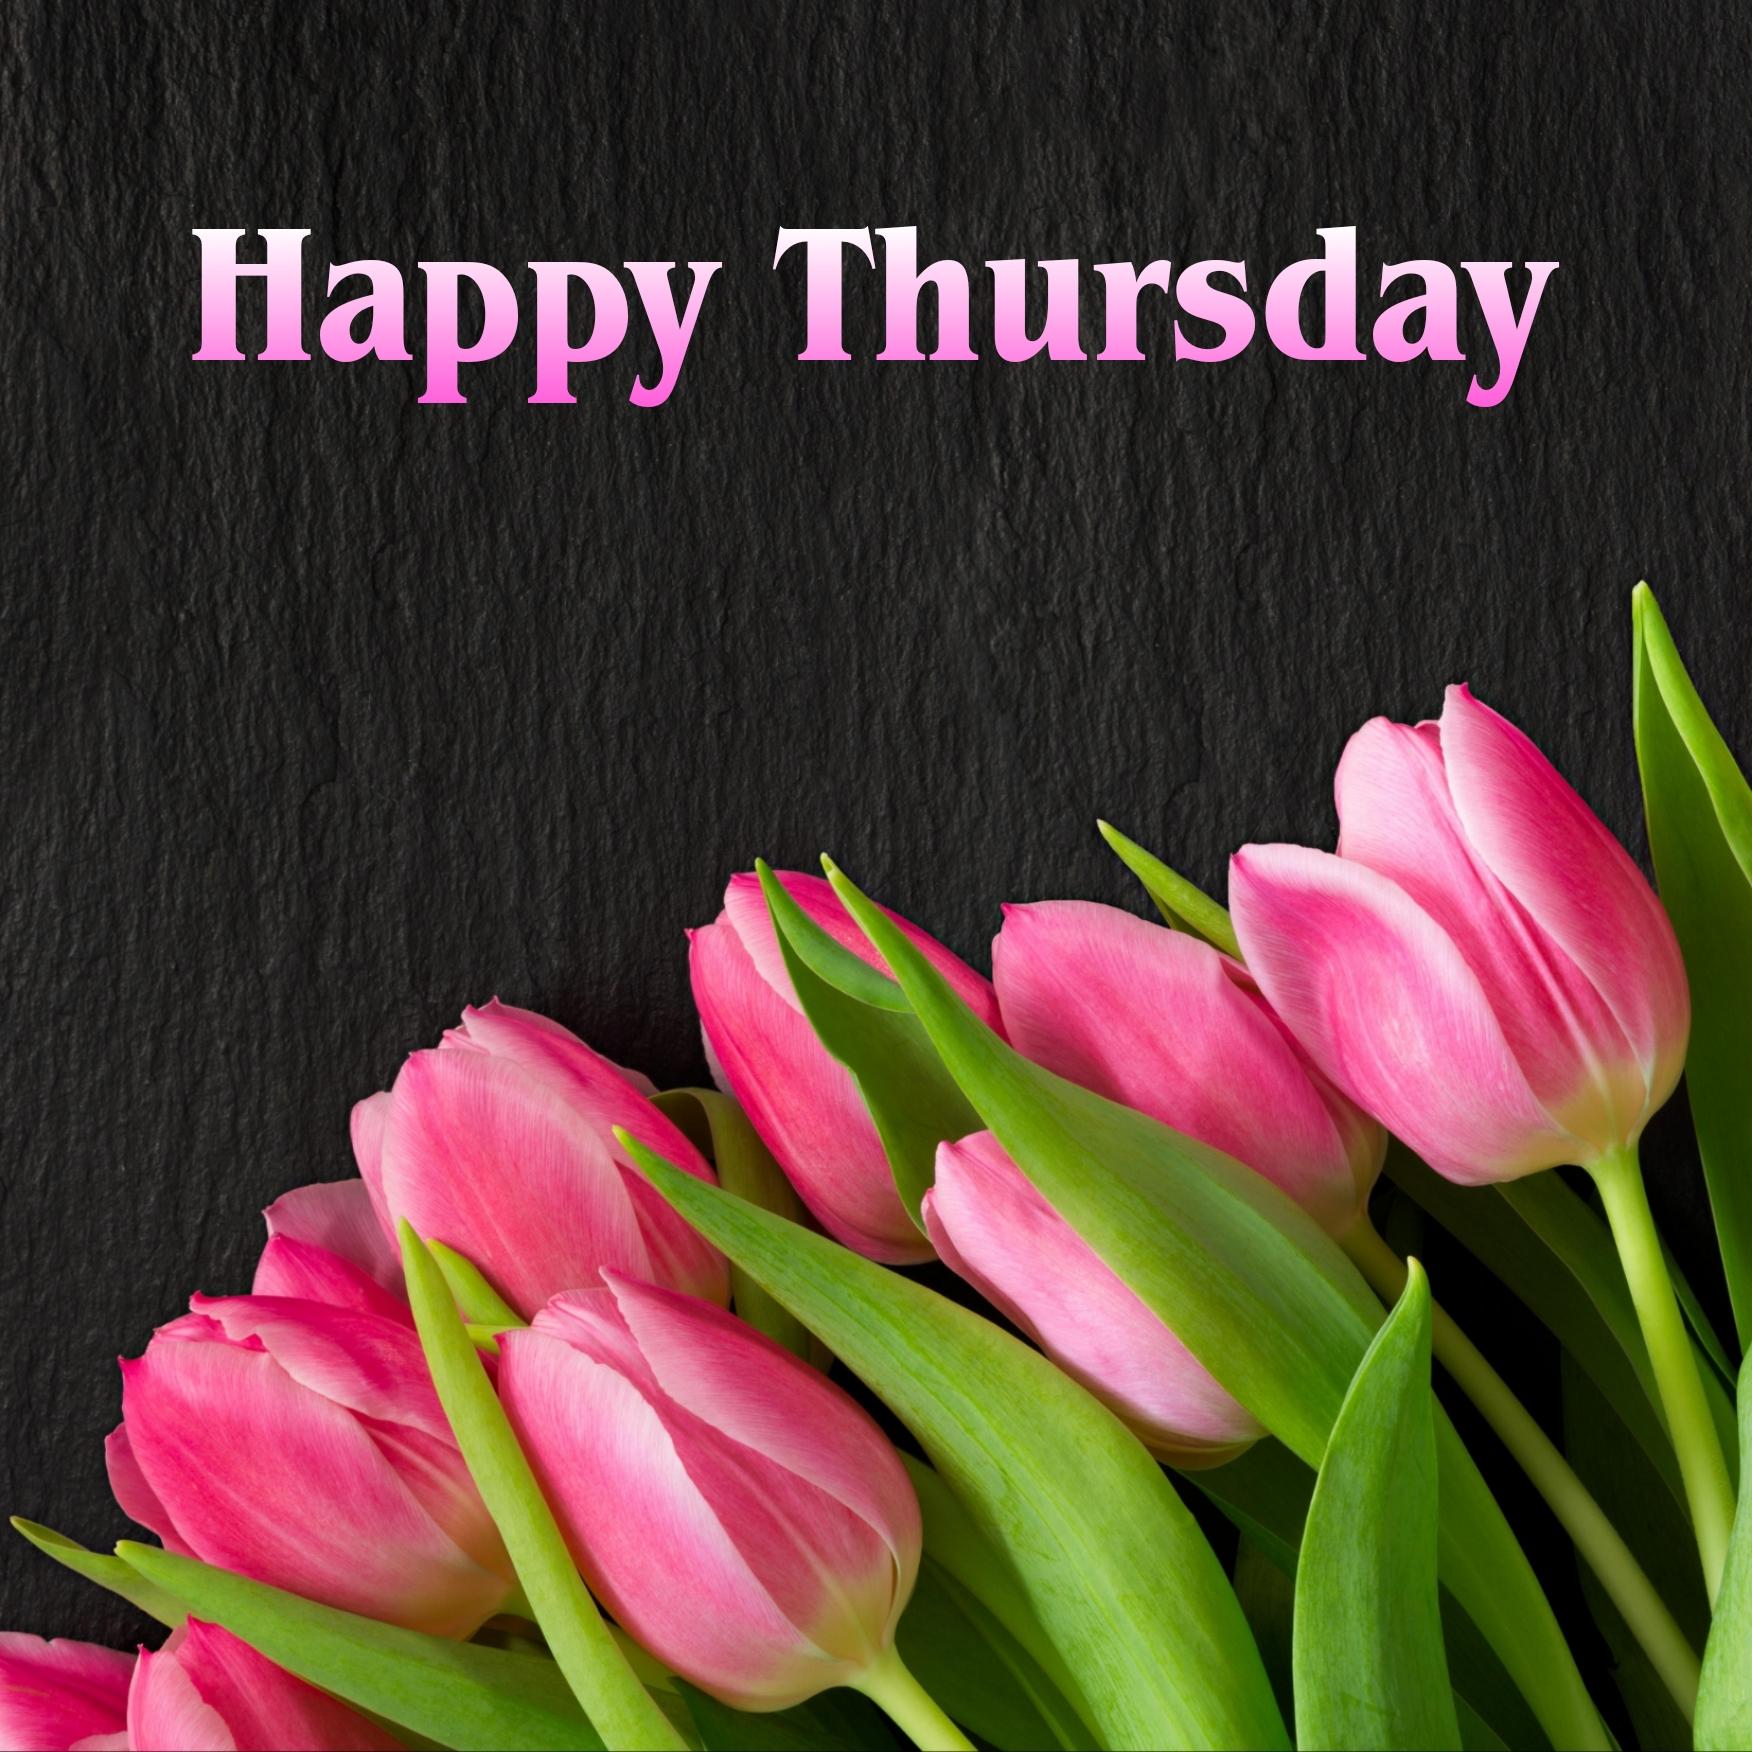 Happy Thursday Images for Whatsapp